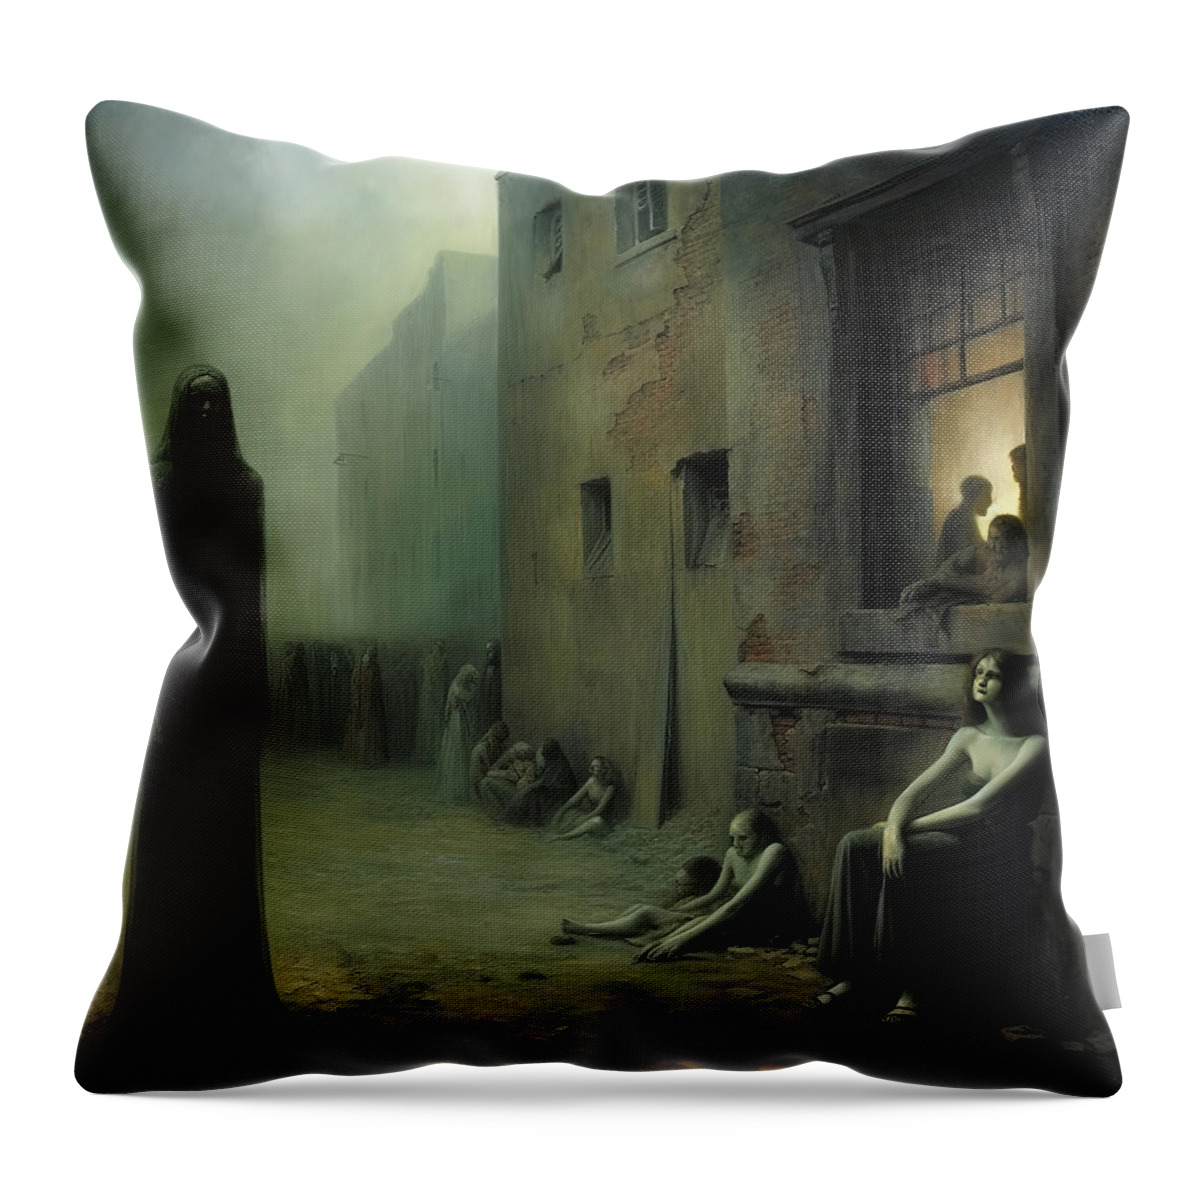 Sad Throw Pillow featuring the painting Coming into Sadness by My Head Cinema